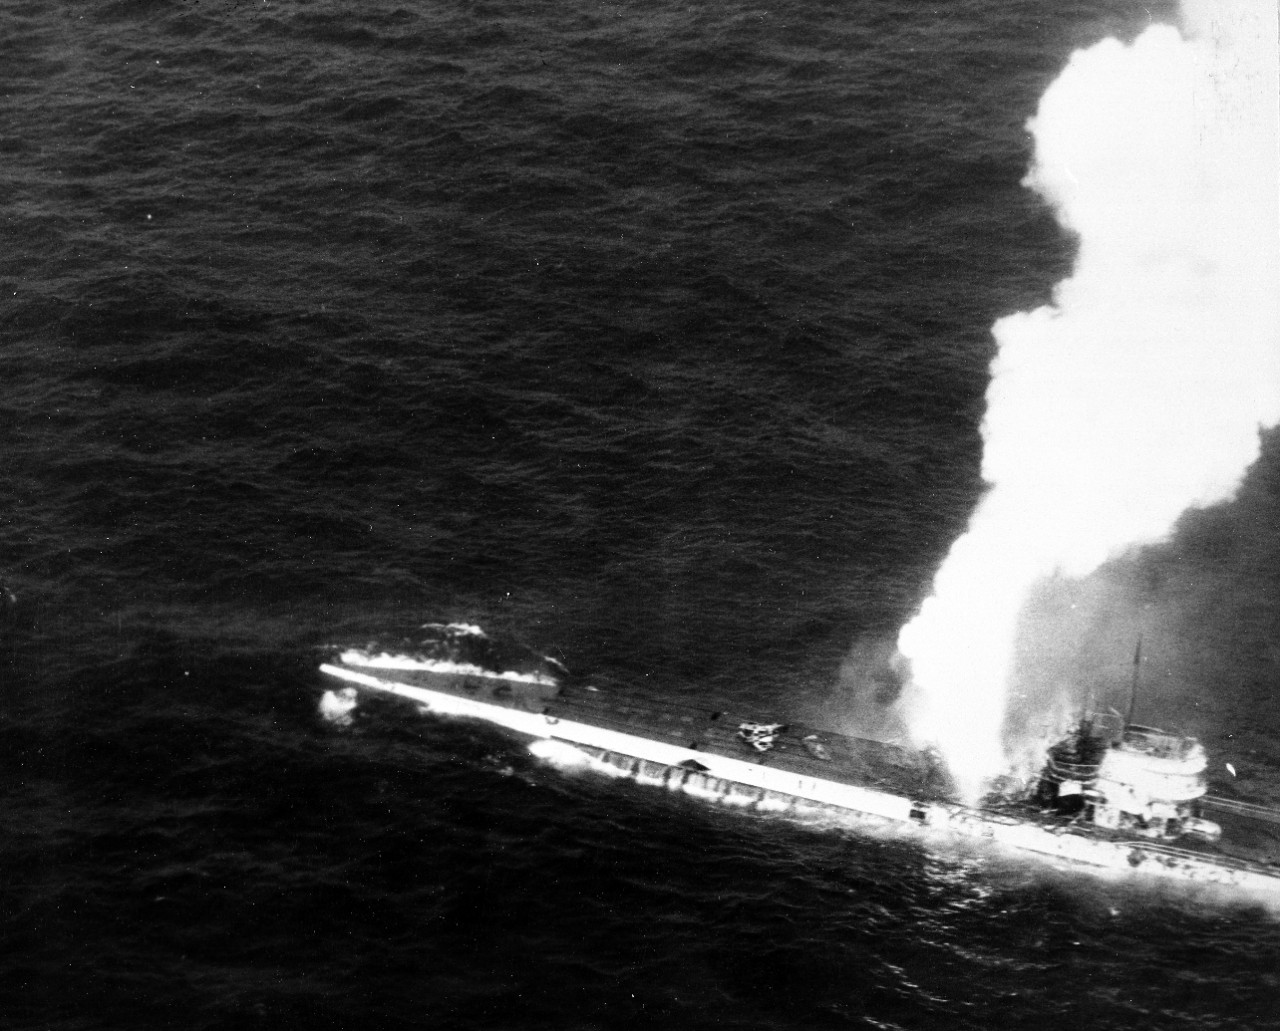 A plane flying from Guadalcanal snaps a picture of U-515 as the submarine burns and sinks, 9 April 1944. The explosion appears to be erupting from the boat’s aft antiaircraft gun battery. (U.S. Navy Photograph 80-G-227197, National Archives and R...